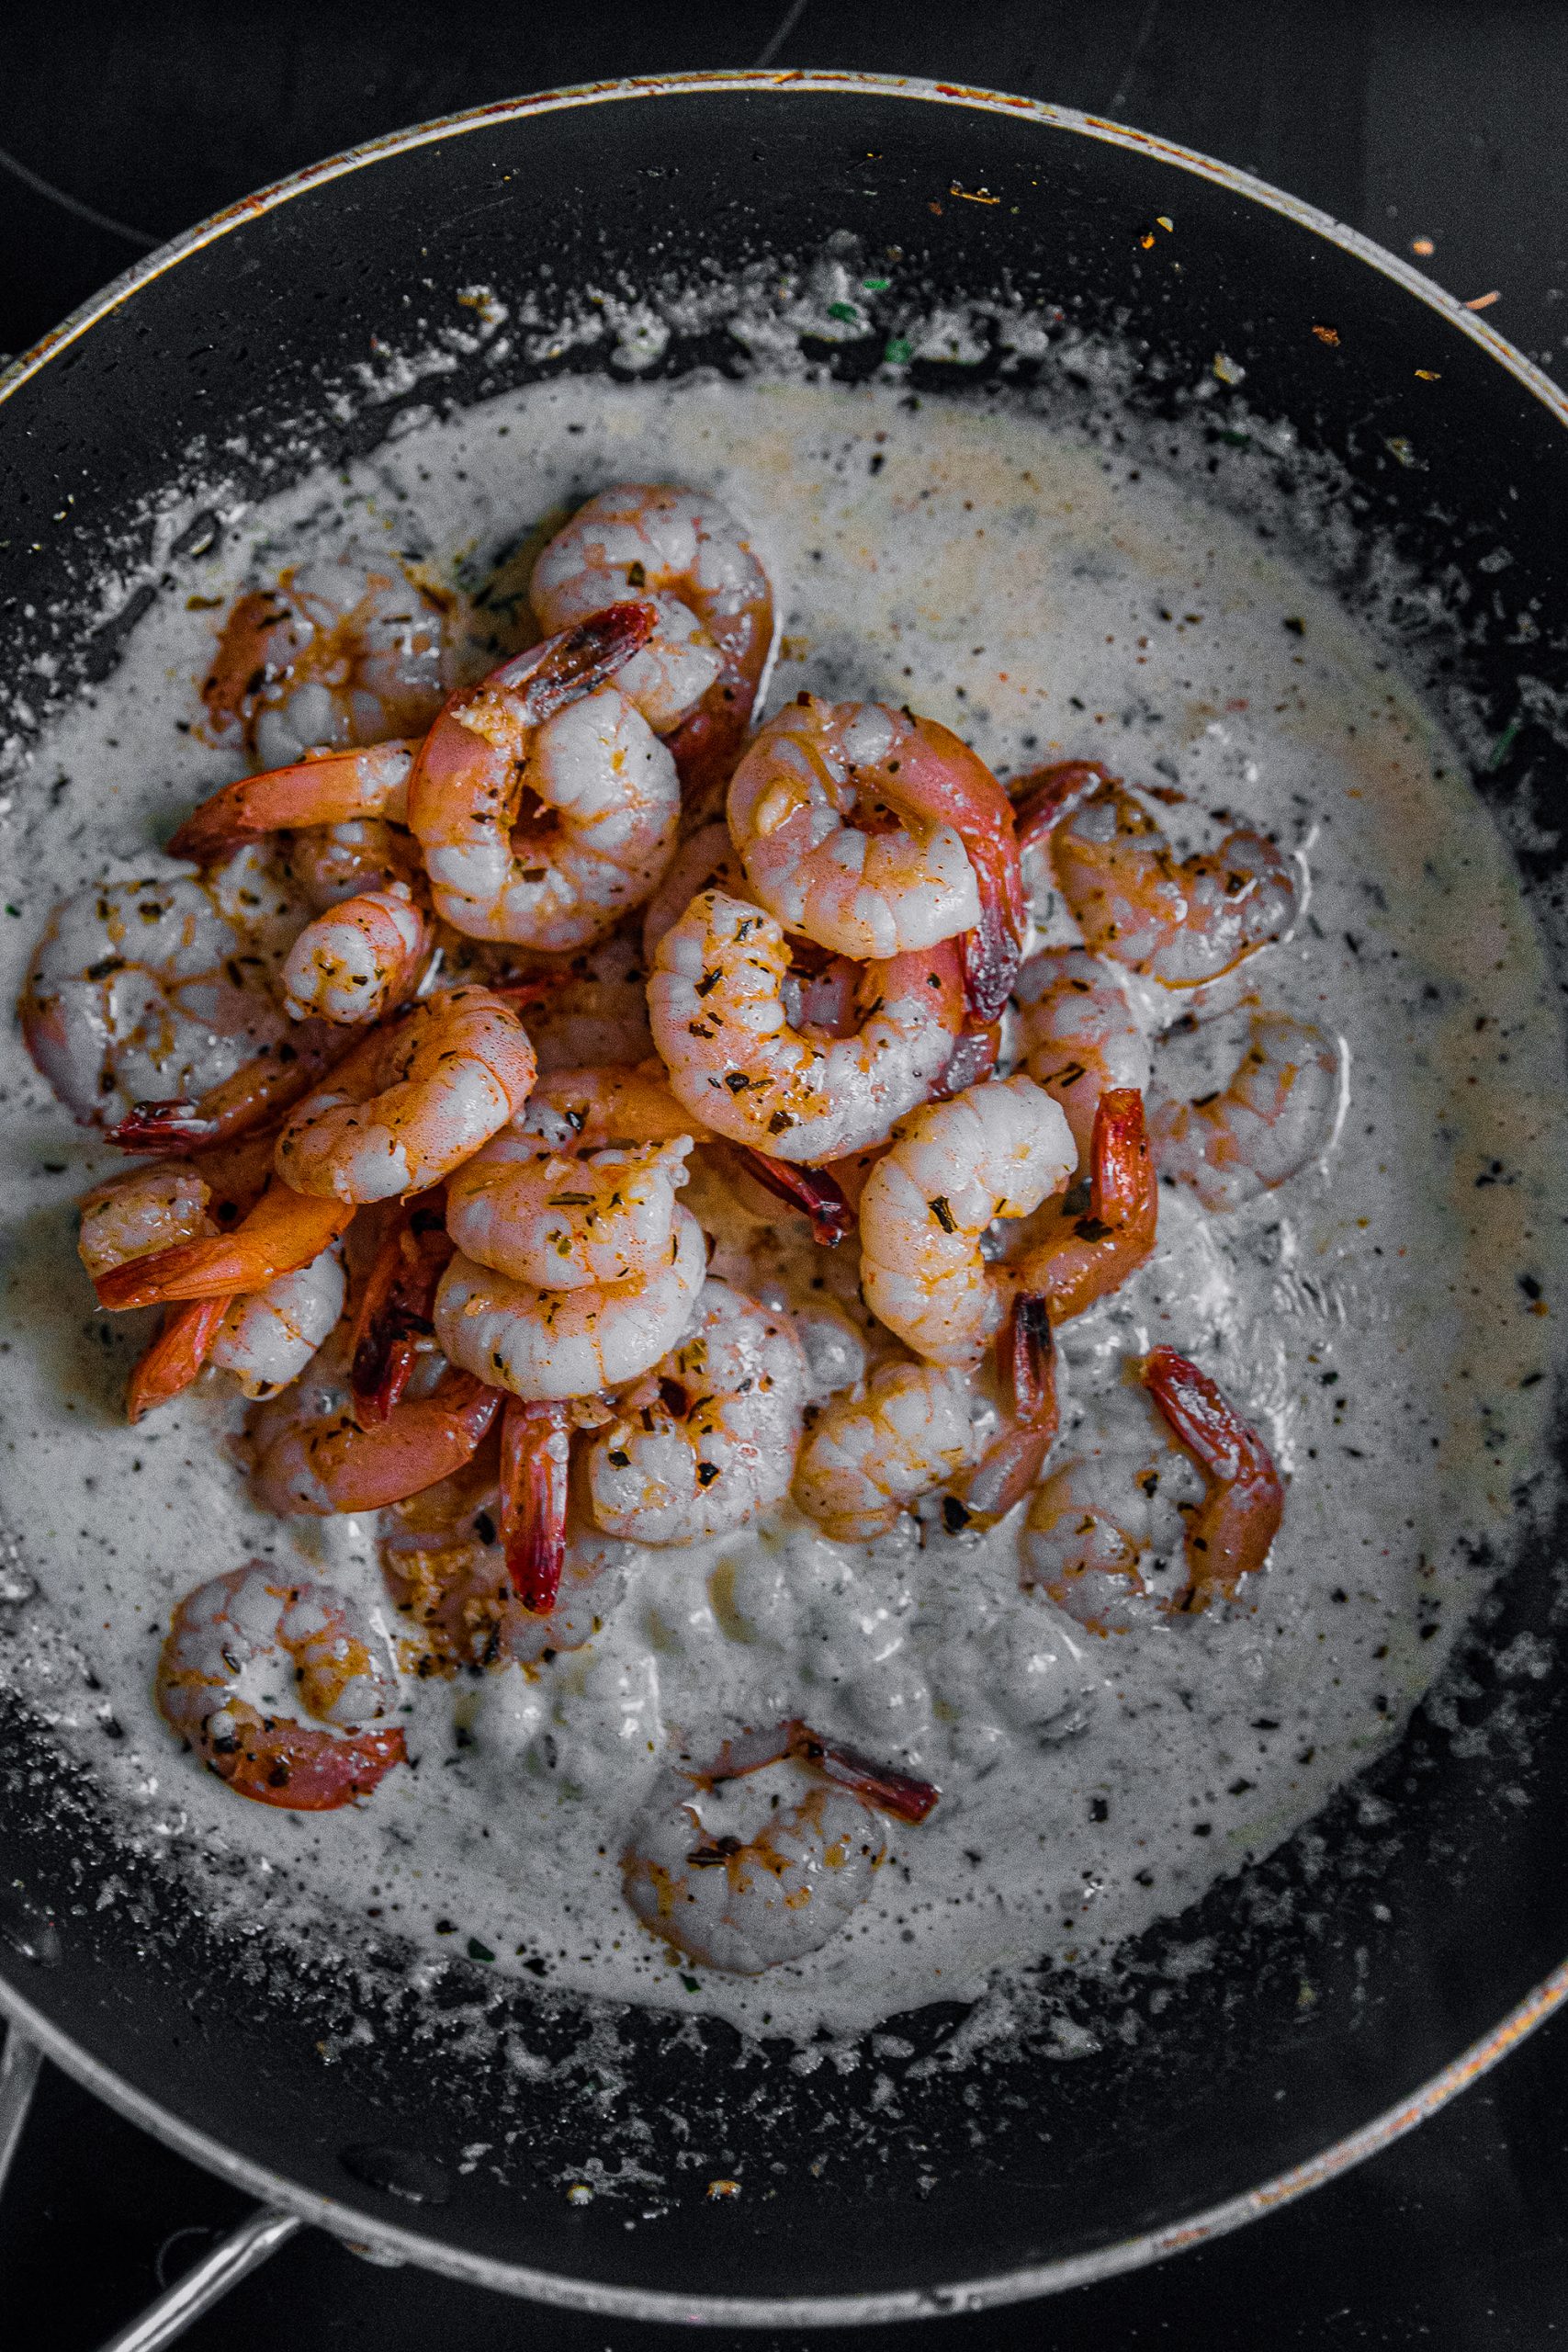 Lower heat to medium-low and add shrimp again.